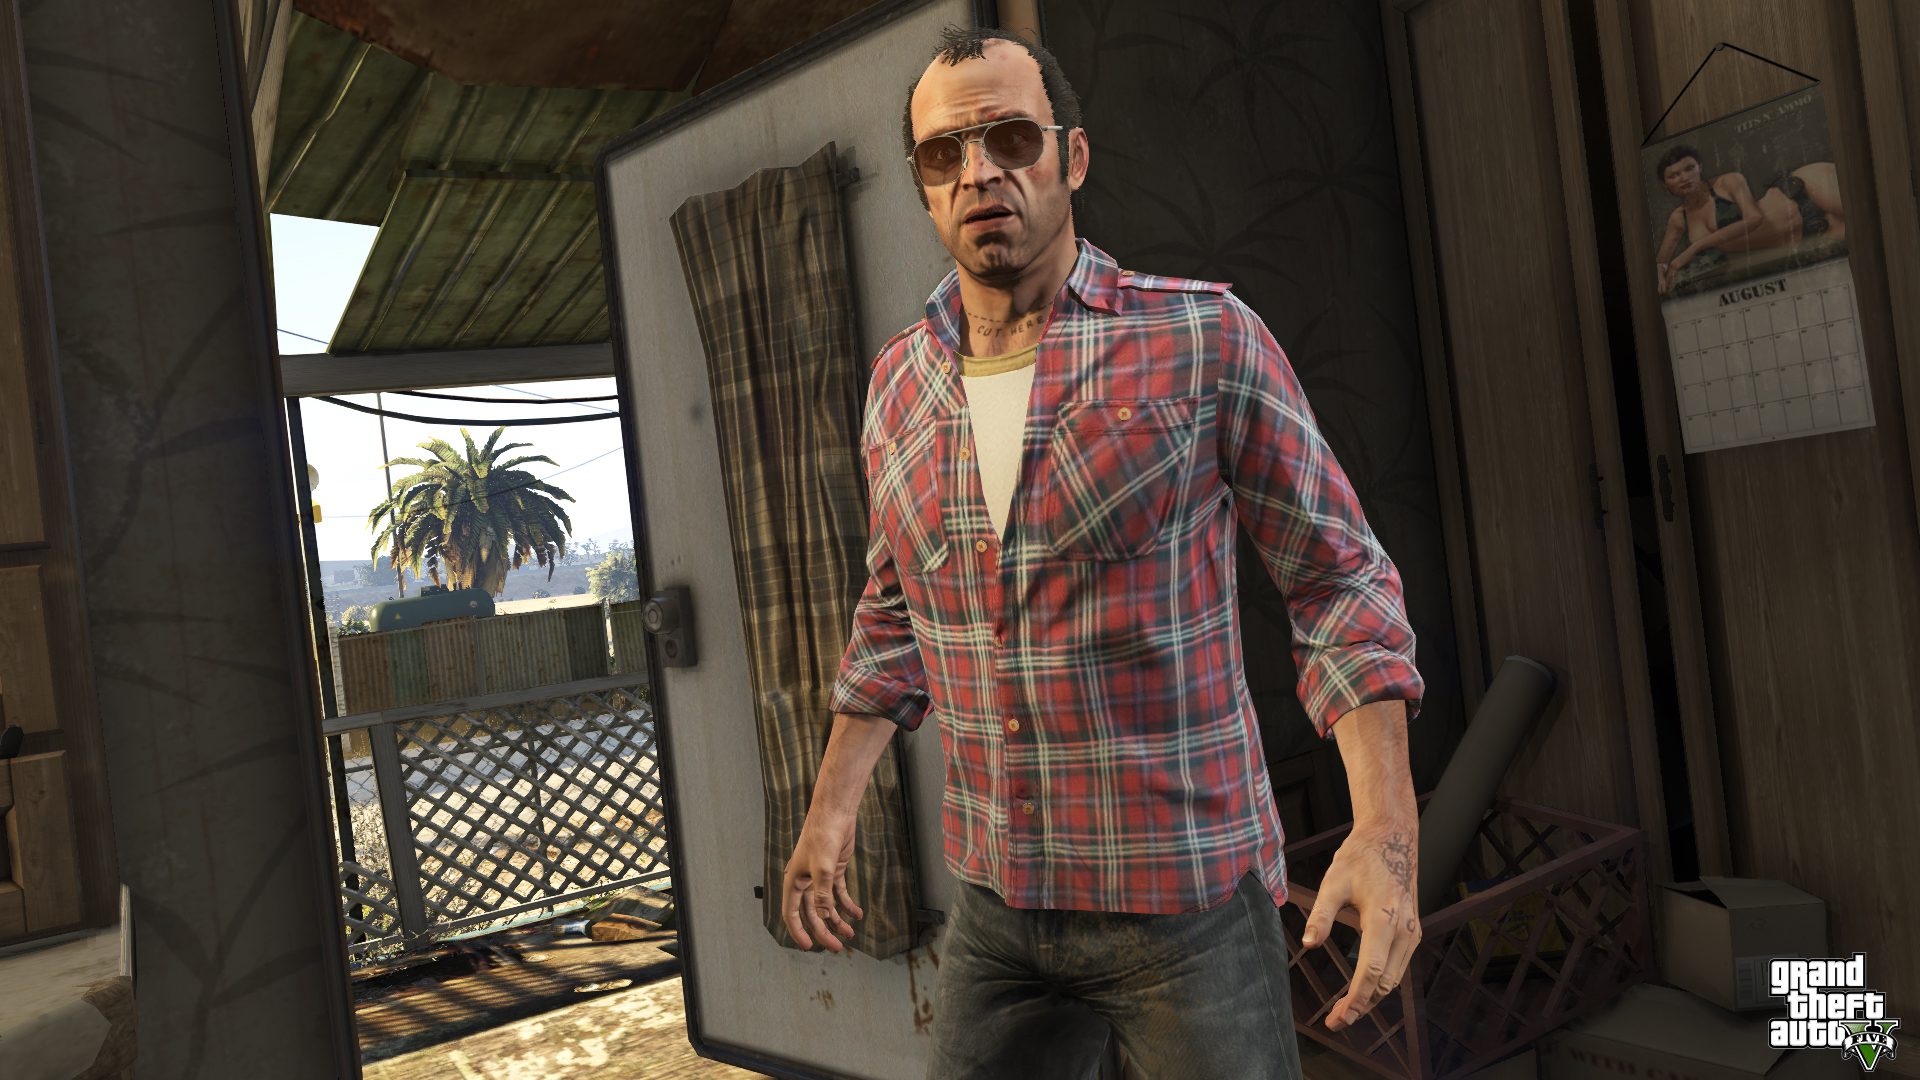 Ahead of GTA VI, the best selling GTA games in the UK have been ...